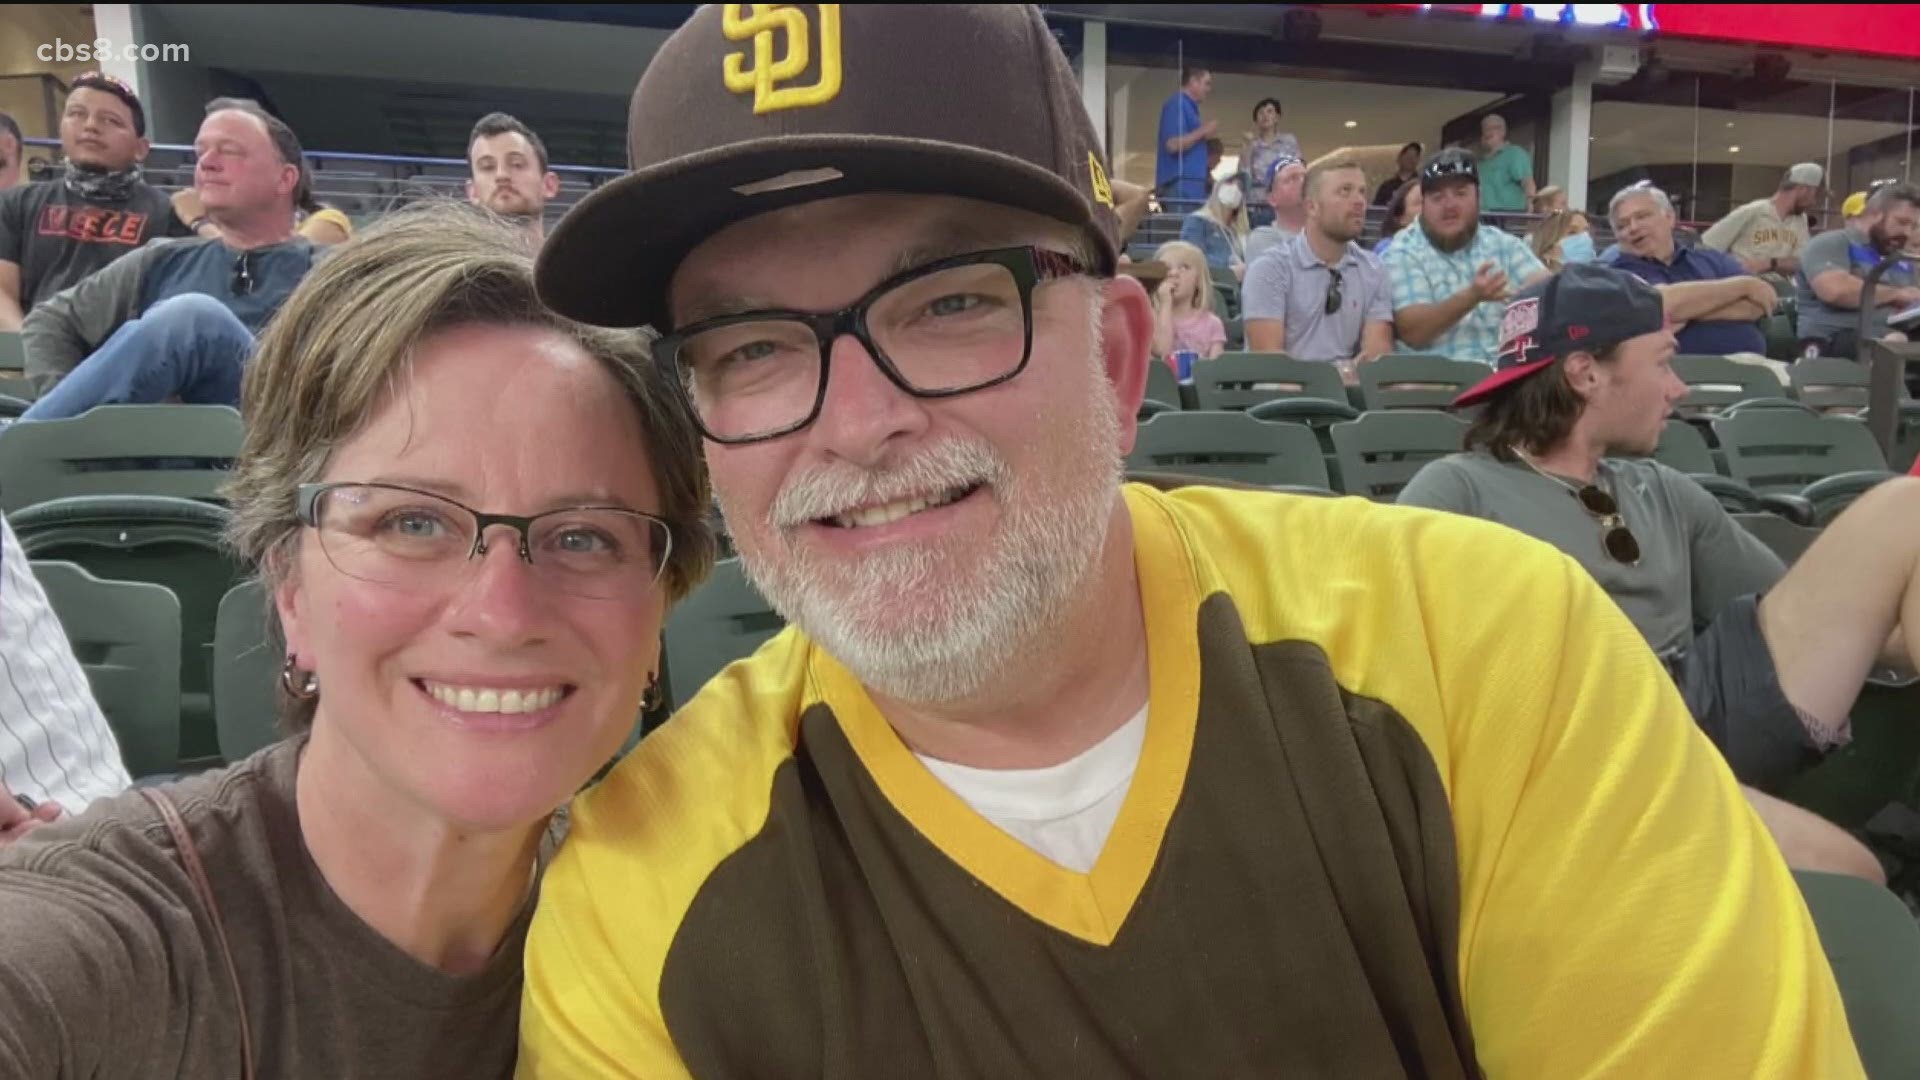 When San Diego native and Grossmont High School grad Joe Musgrove pitched the Padres first no-hitter, most fans watched from home - but at least one fan was there.